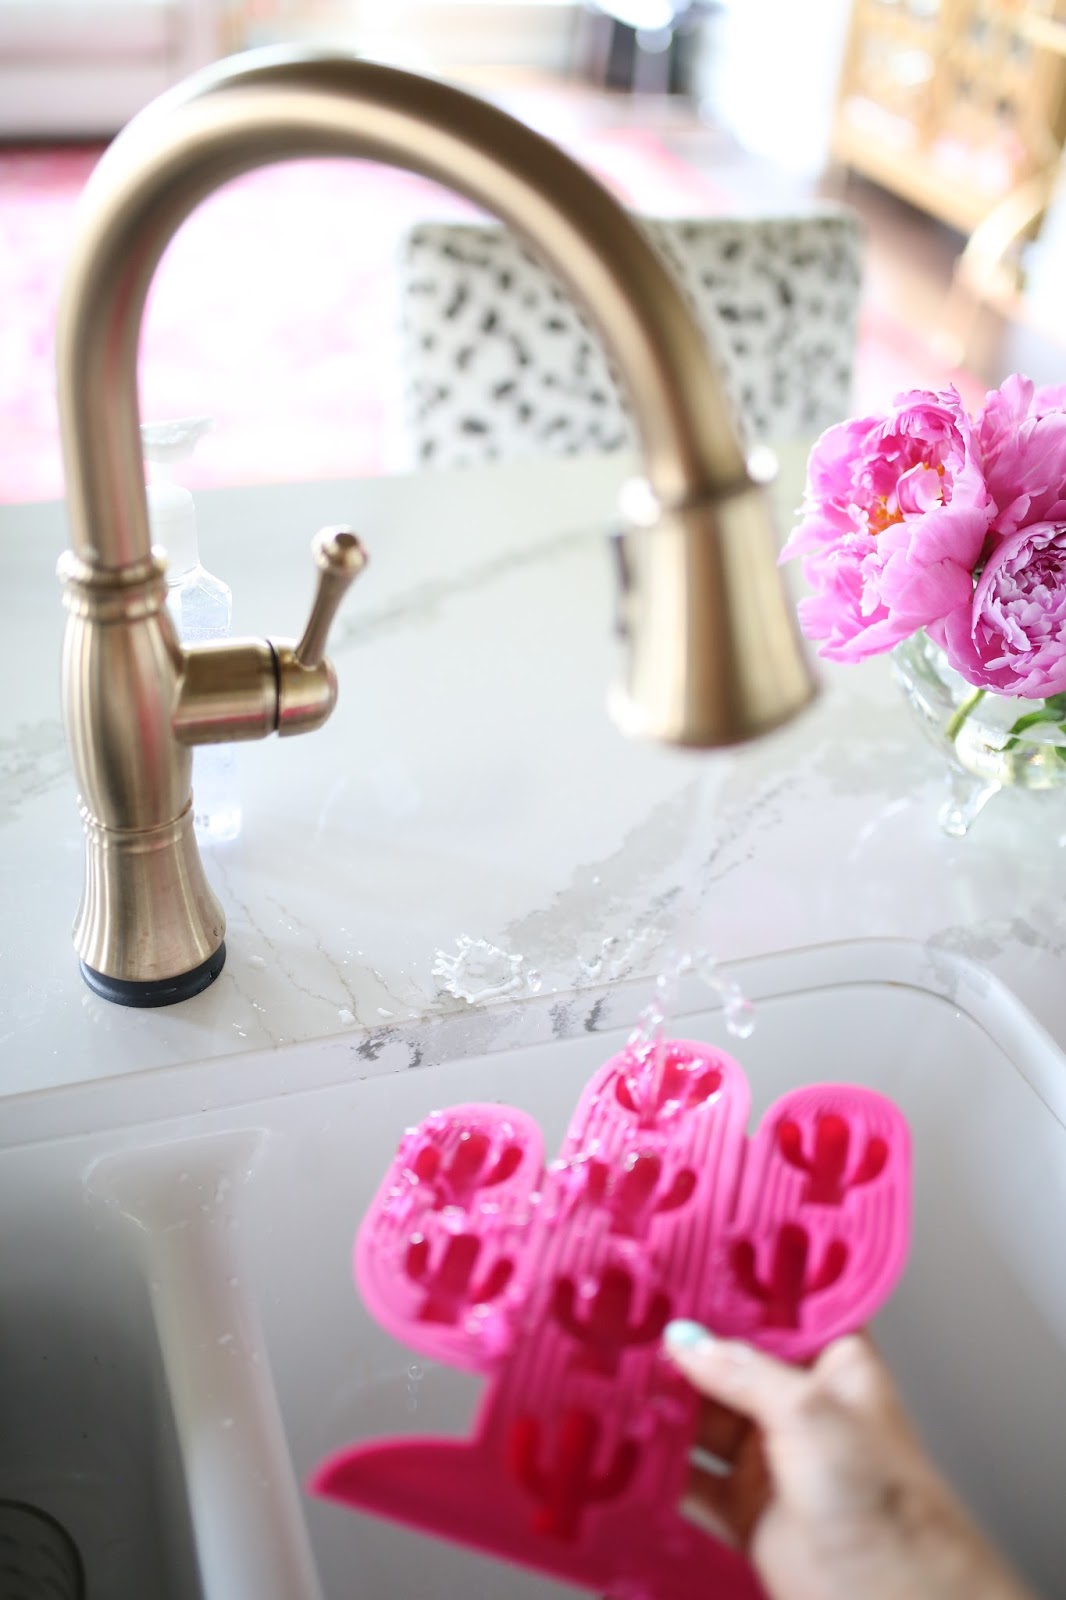 emily gemma, emily gemma blog, the sweetest thing blog, all white kitchen, gold kitchen faucet, cute ice cubes, summer, fun summer ideas, pretty kitchen, beautiful faucet, cactus, cactus ice cubes, white kitchen sink, party ideas, cambria brittanica countertops, painters, golden doodle, cactus party lights, peonies, pink peonies, pineapple, pineapple decor, pink ice cube tray, green ice cube tray, party ideas, kid activities, home decor, white kitchen